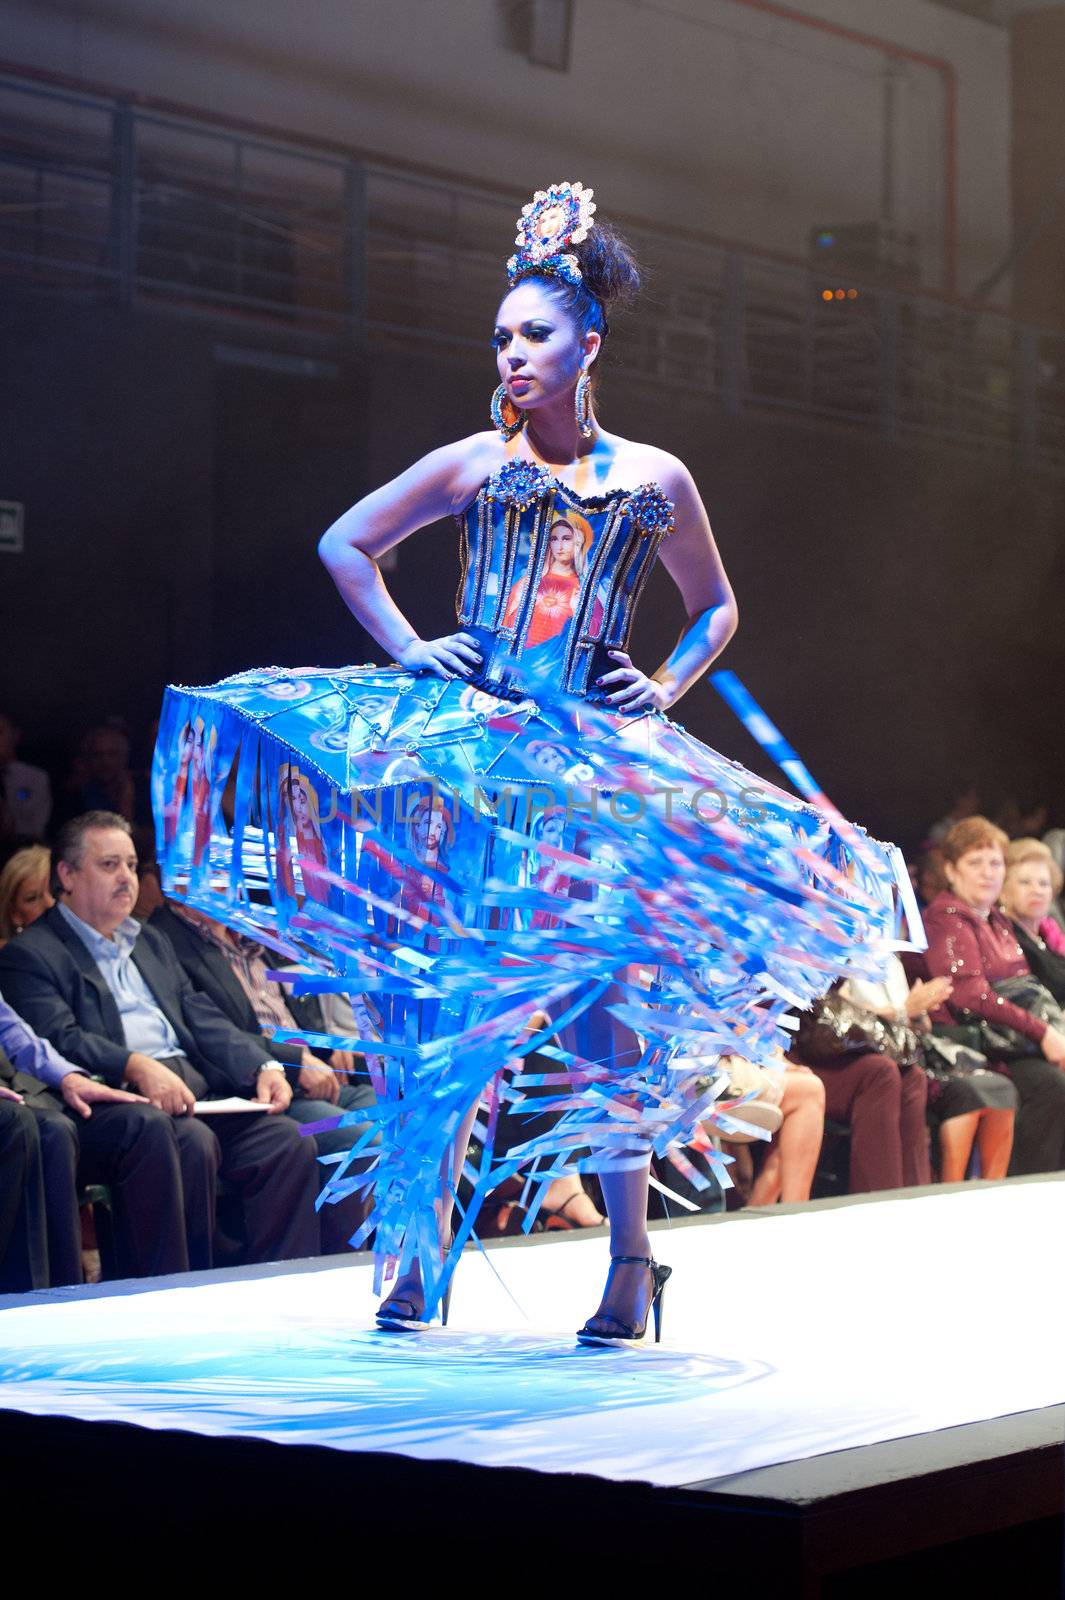 CANARY ISLANDS - 28 OCTOBER: Model on the catwalk wearing carnival costume from designer Julio Vicente Artiles during Carnival Fashion Week October 28, 2011 in Canary Islands, Spain